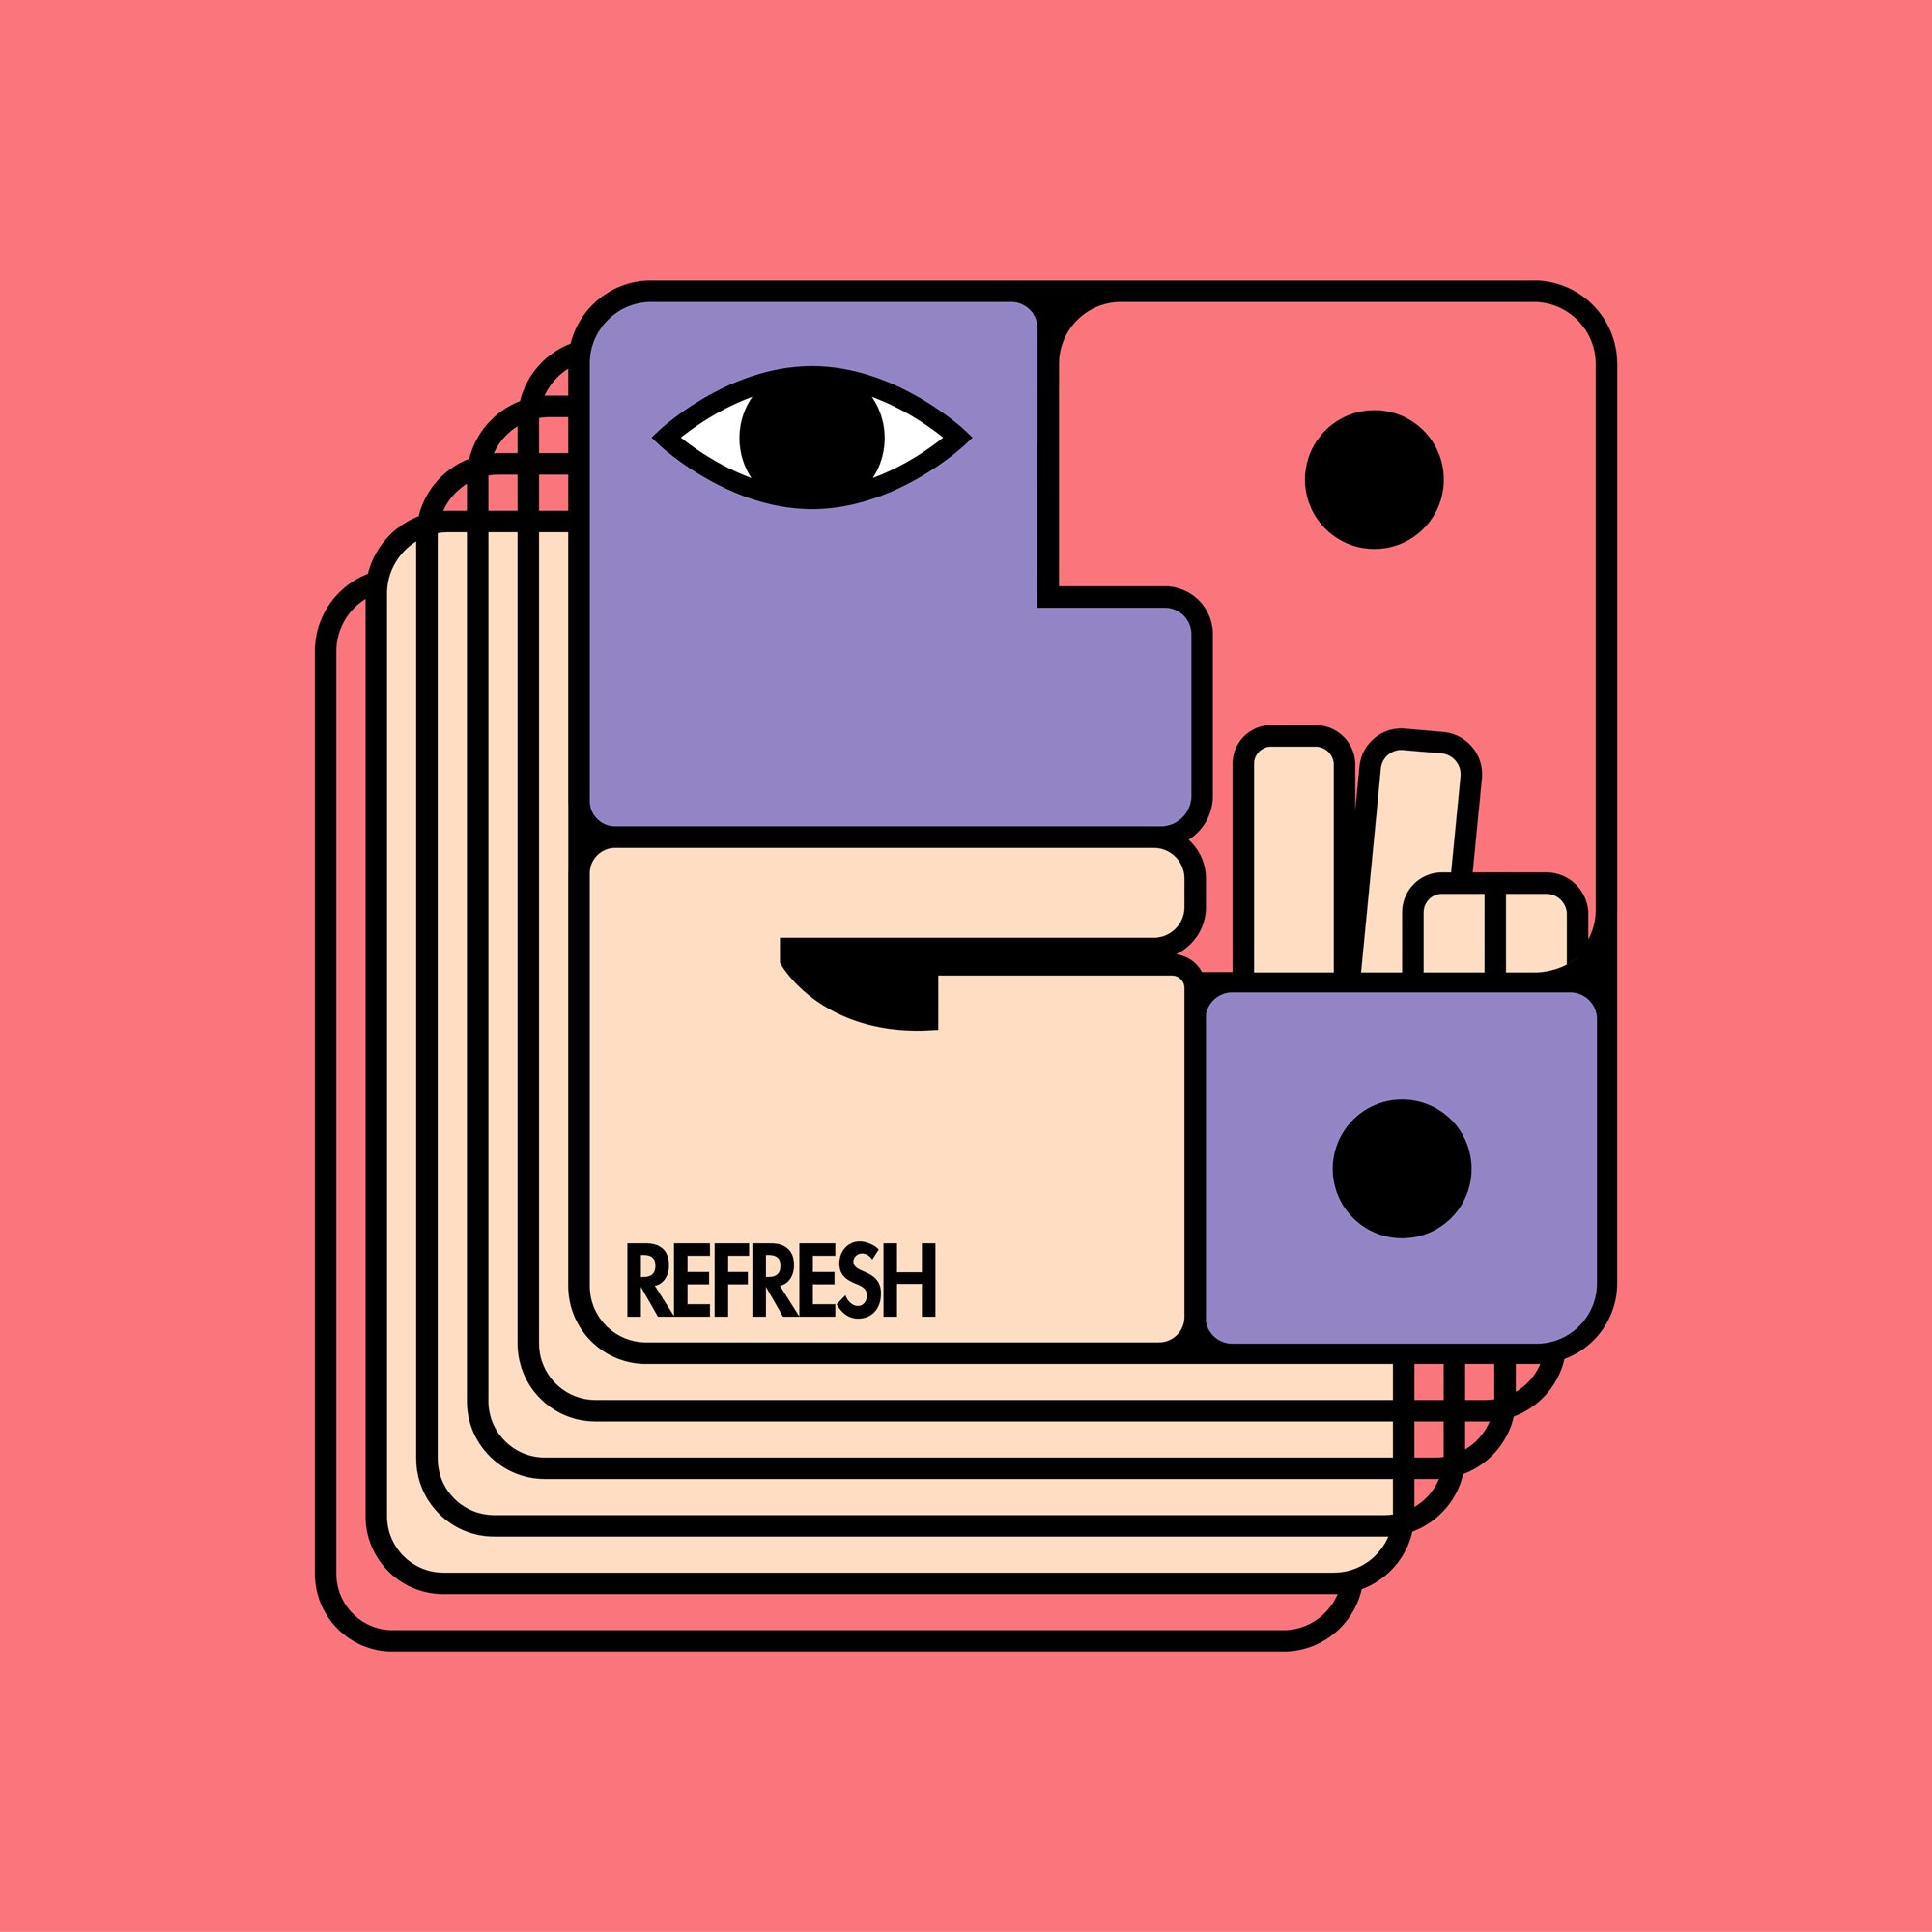 Illustration of the word LOGO representing the feeling of refresh